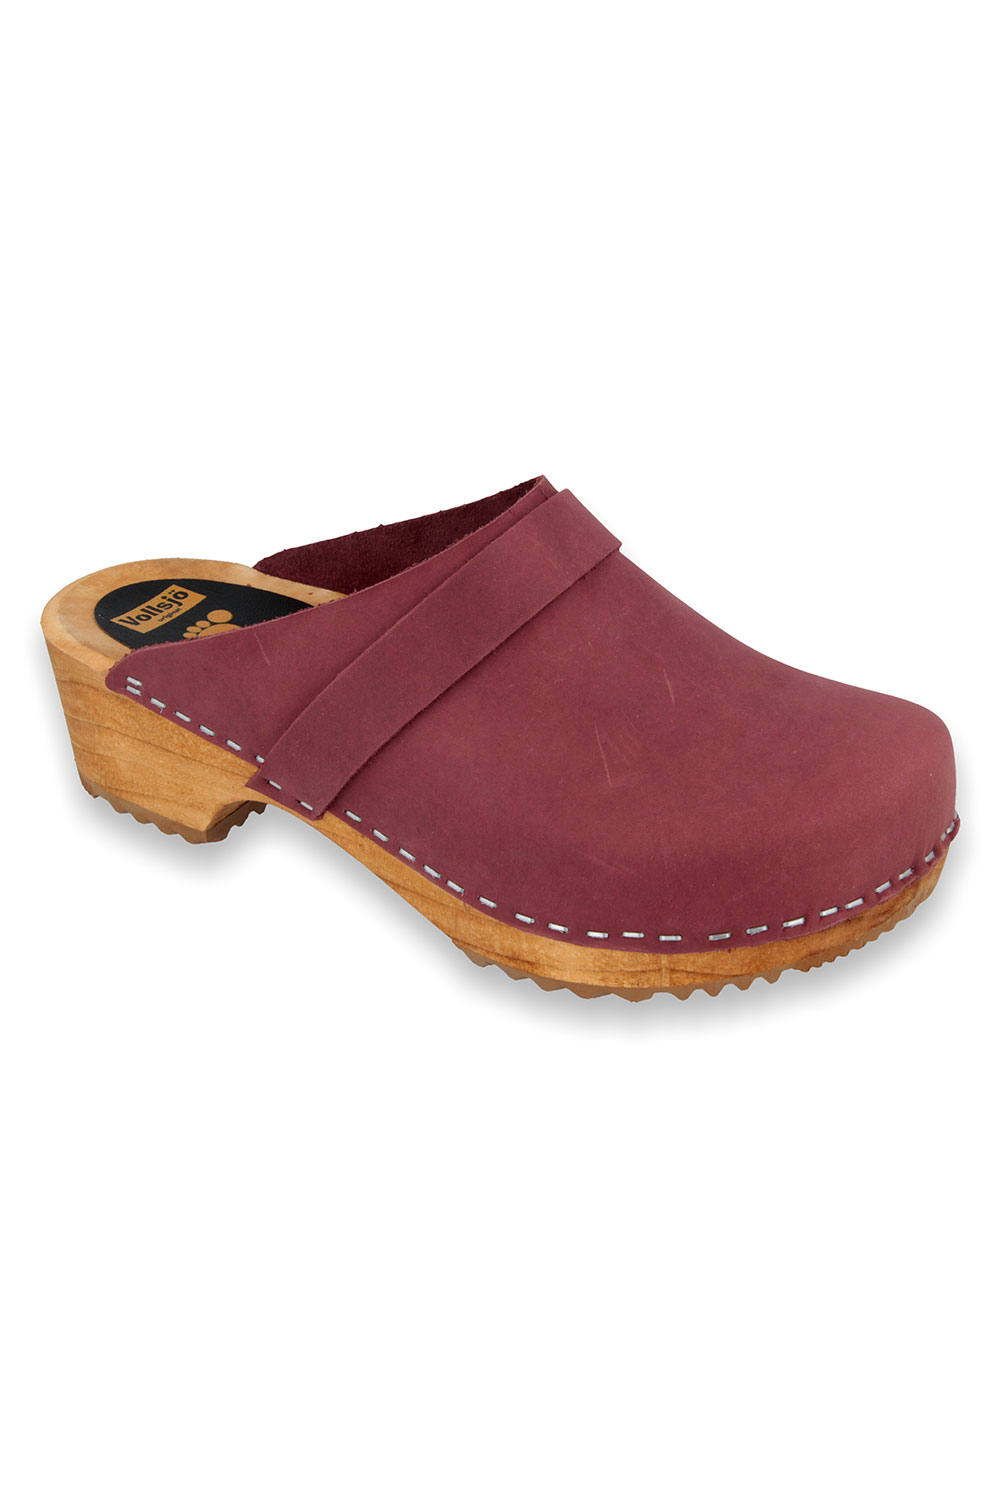 real wooden clogs